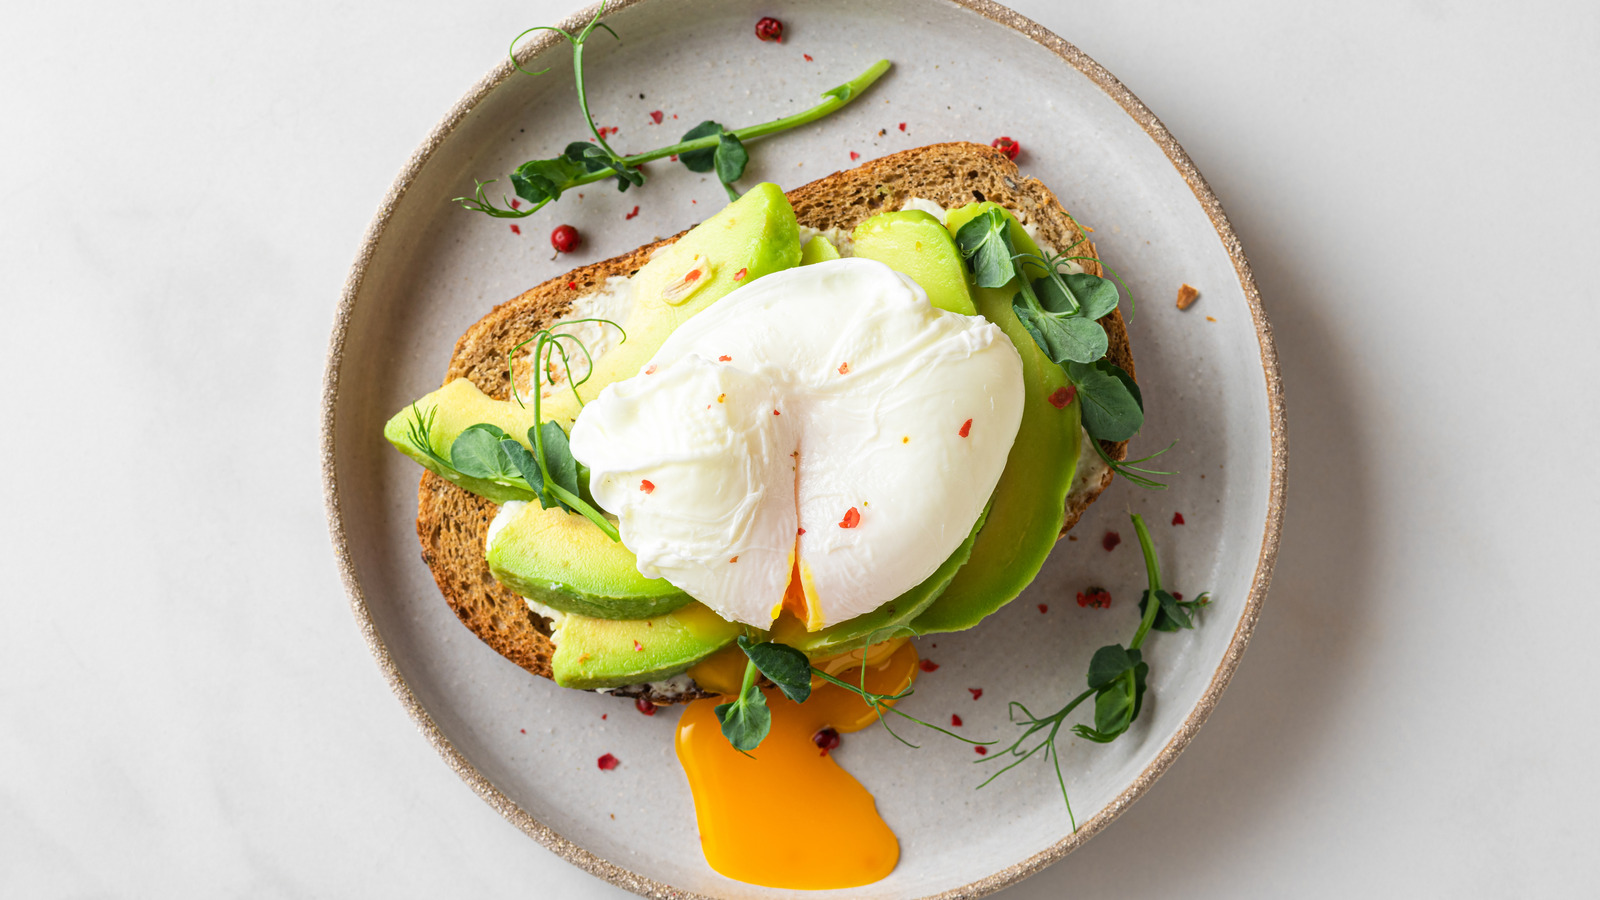 https://www.thedailymeal.com/img/gallery/12-unconventional-ways-to-poach-an-egg-that-actually-work/l-intro-1674159383.jpg